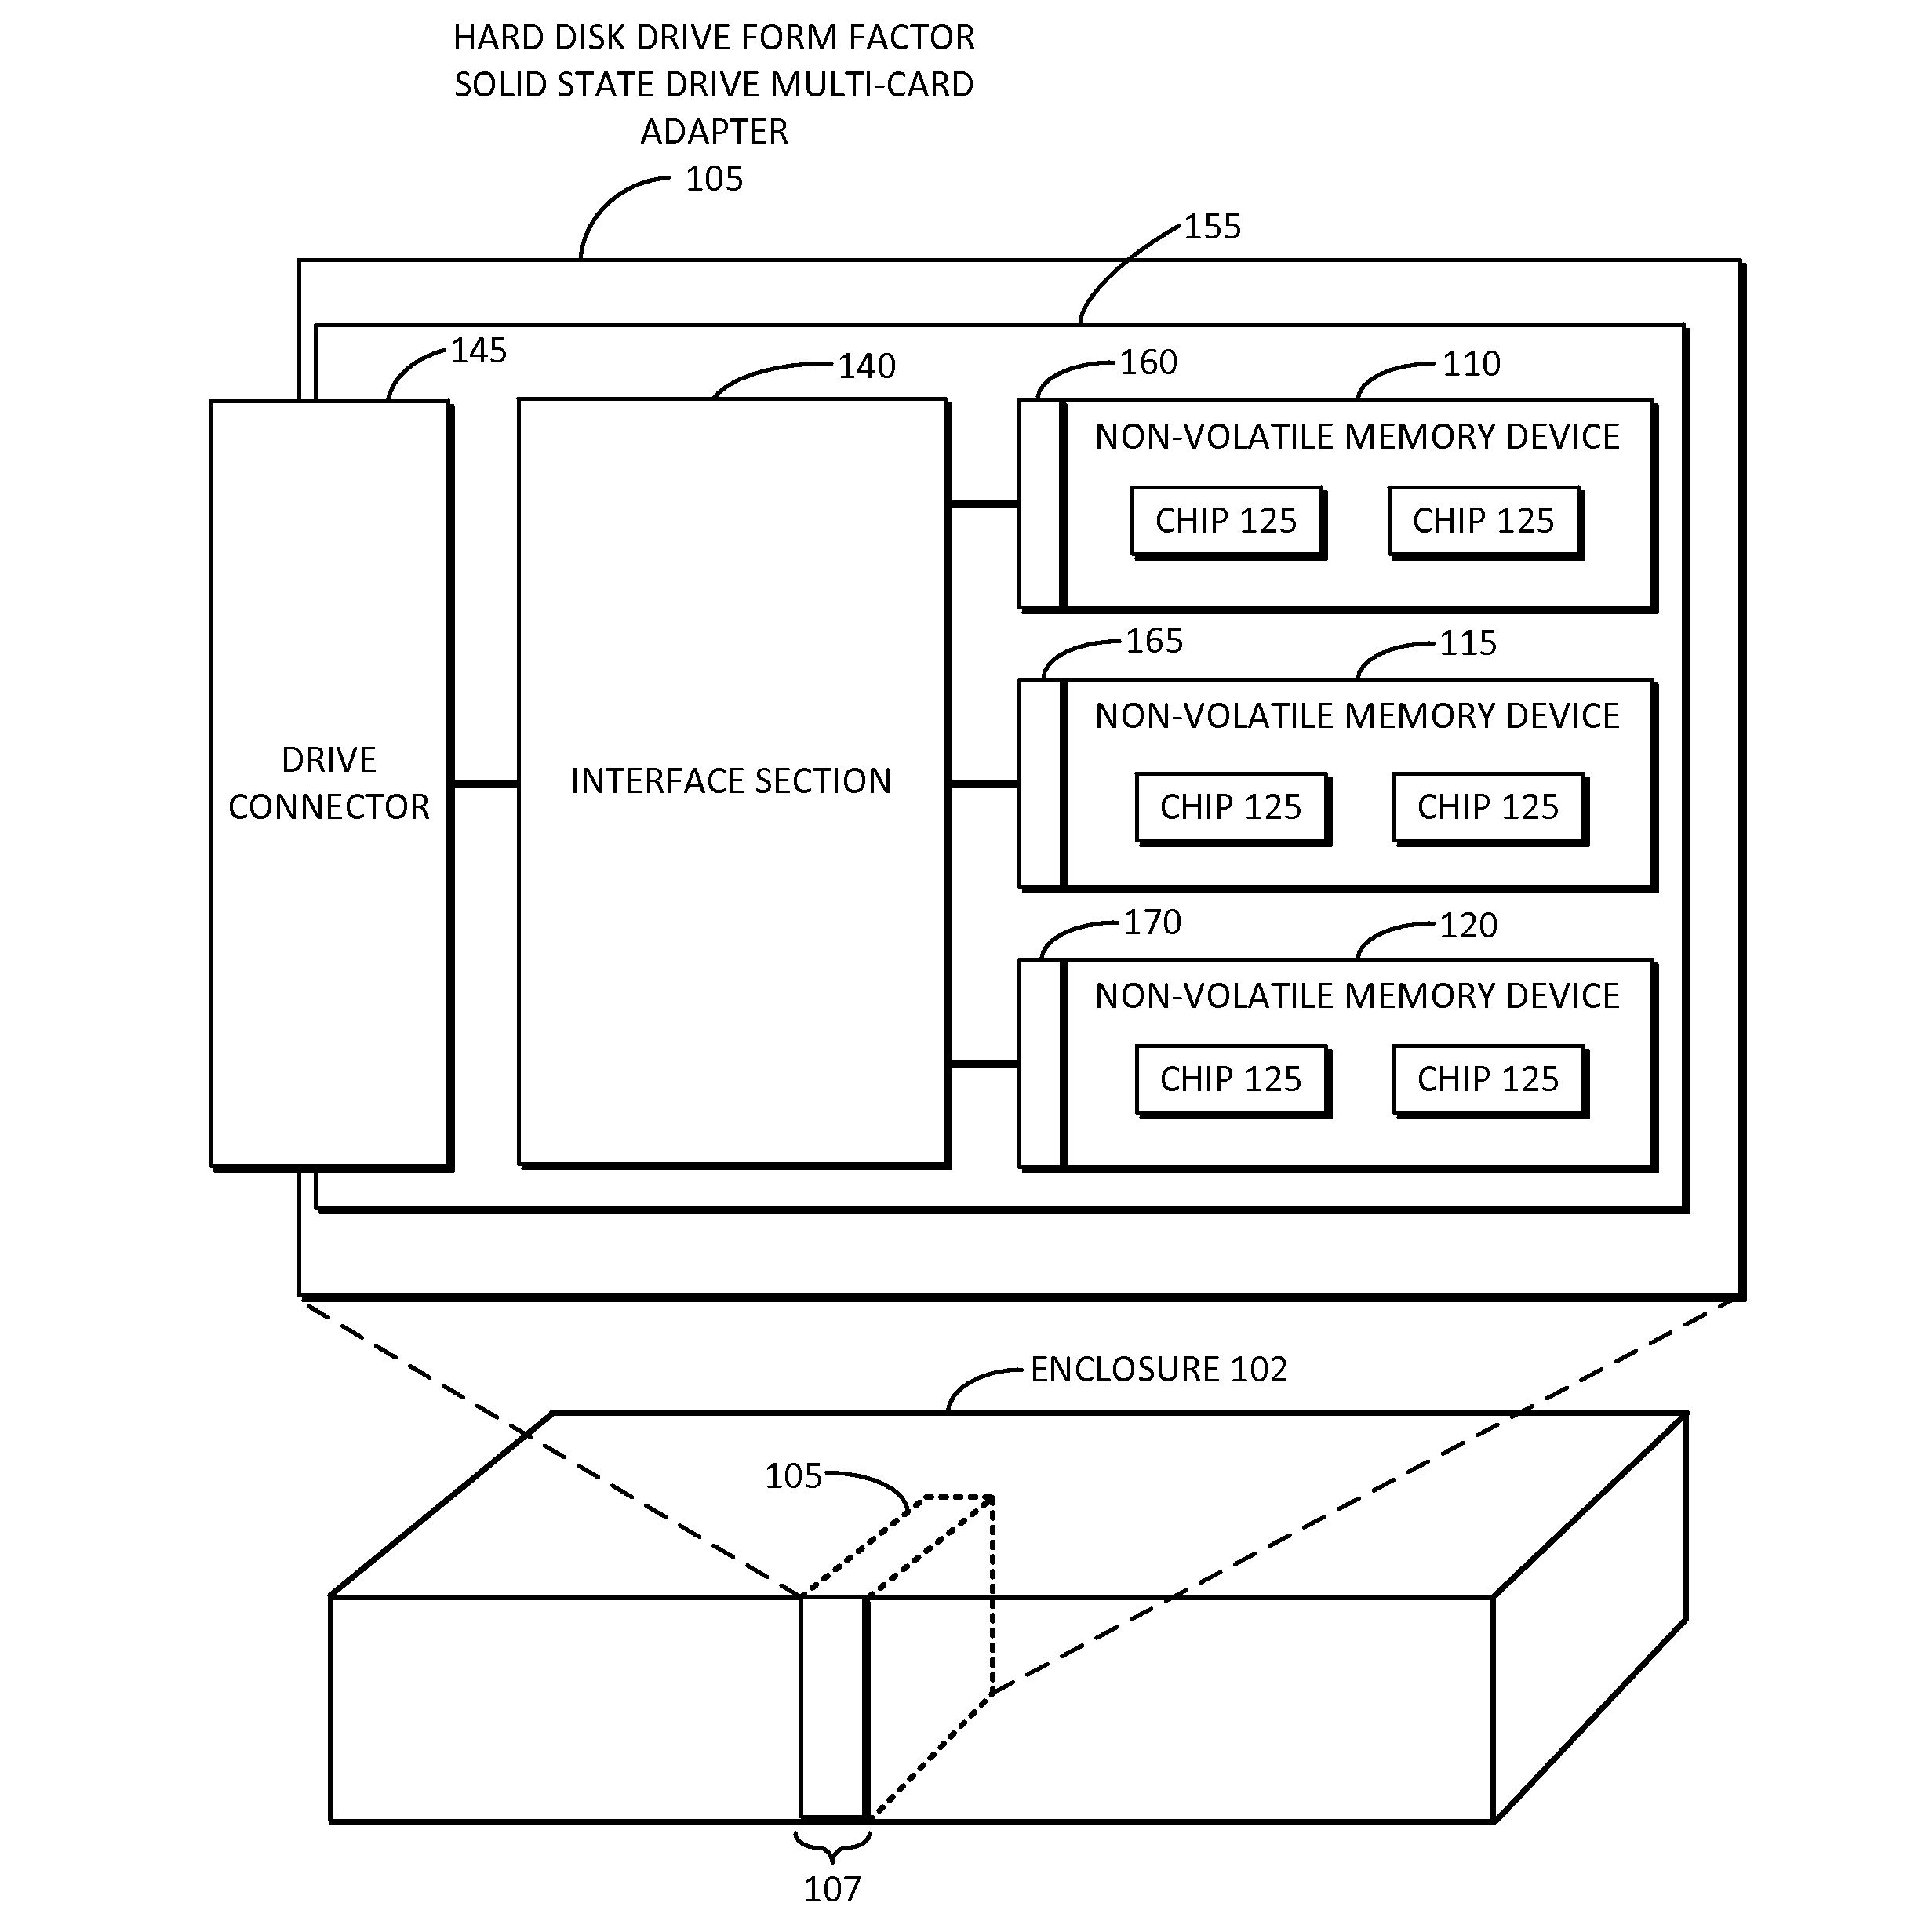 Solid state drive multi-card adapter with integrated processing